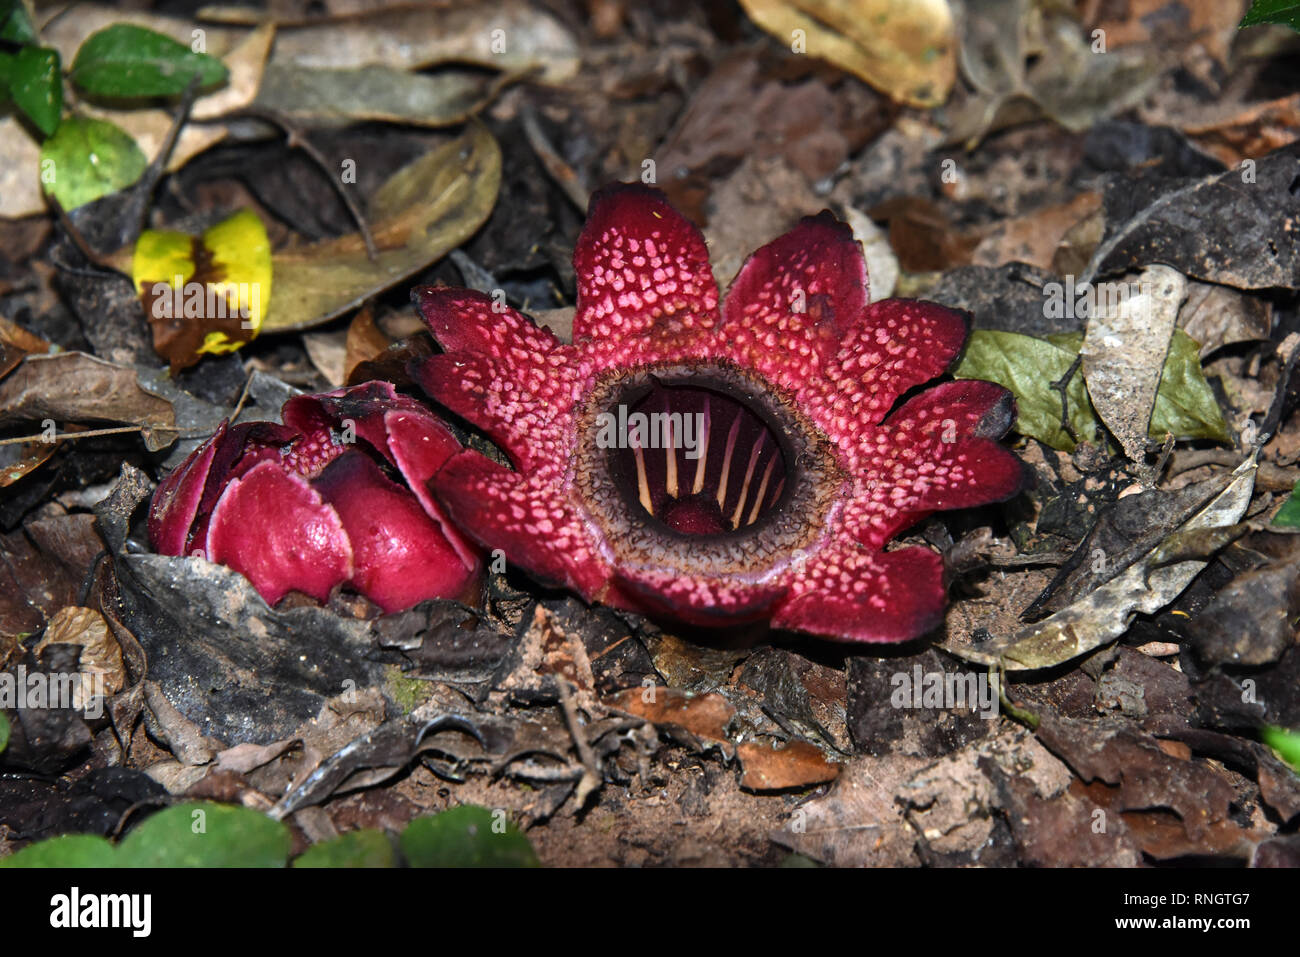 A male flower and a bud of Sapria gan - a parasitic flowering plant on the forest floor in Thailand Stock Photo